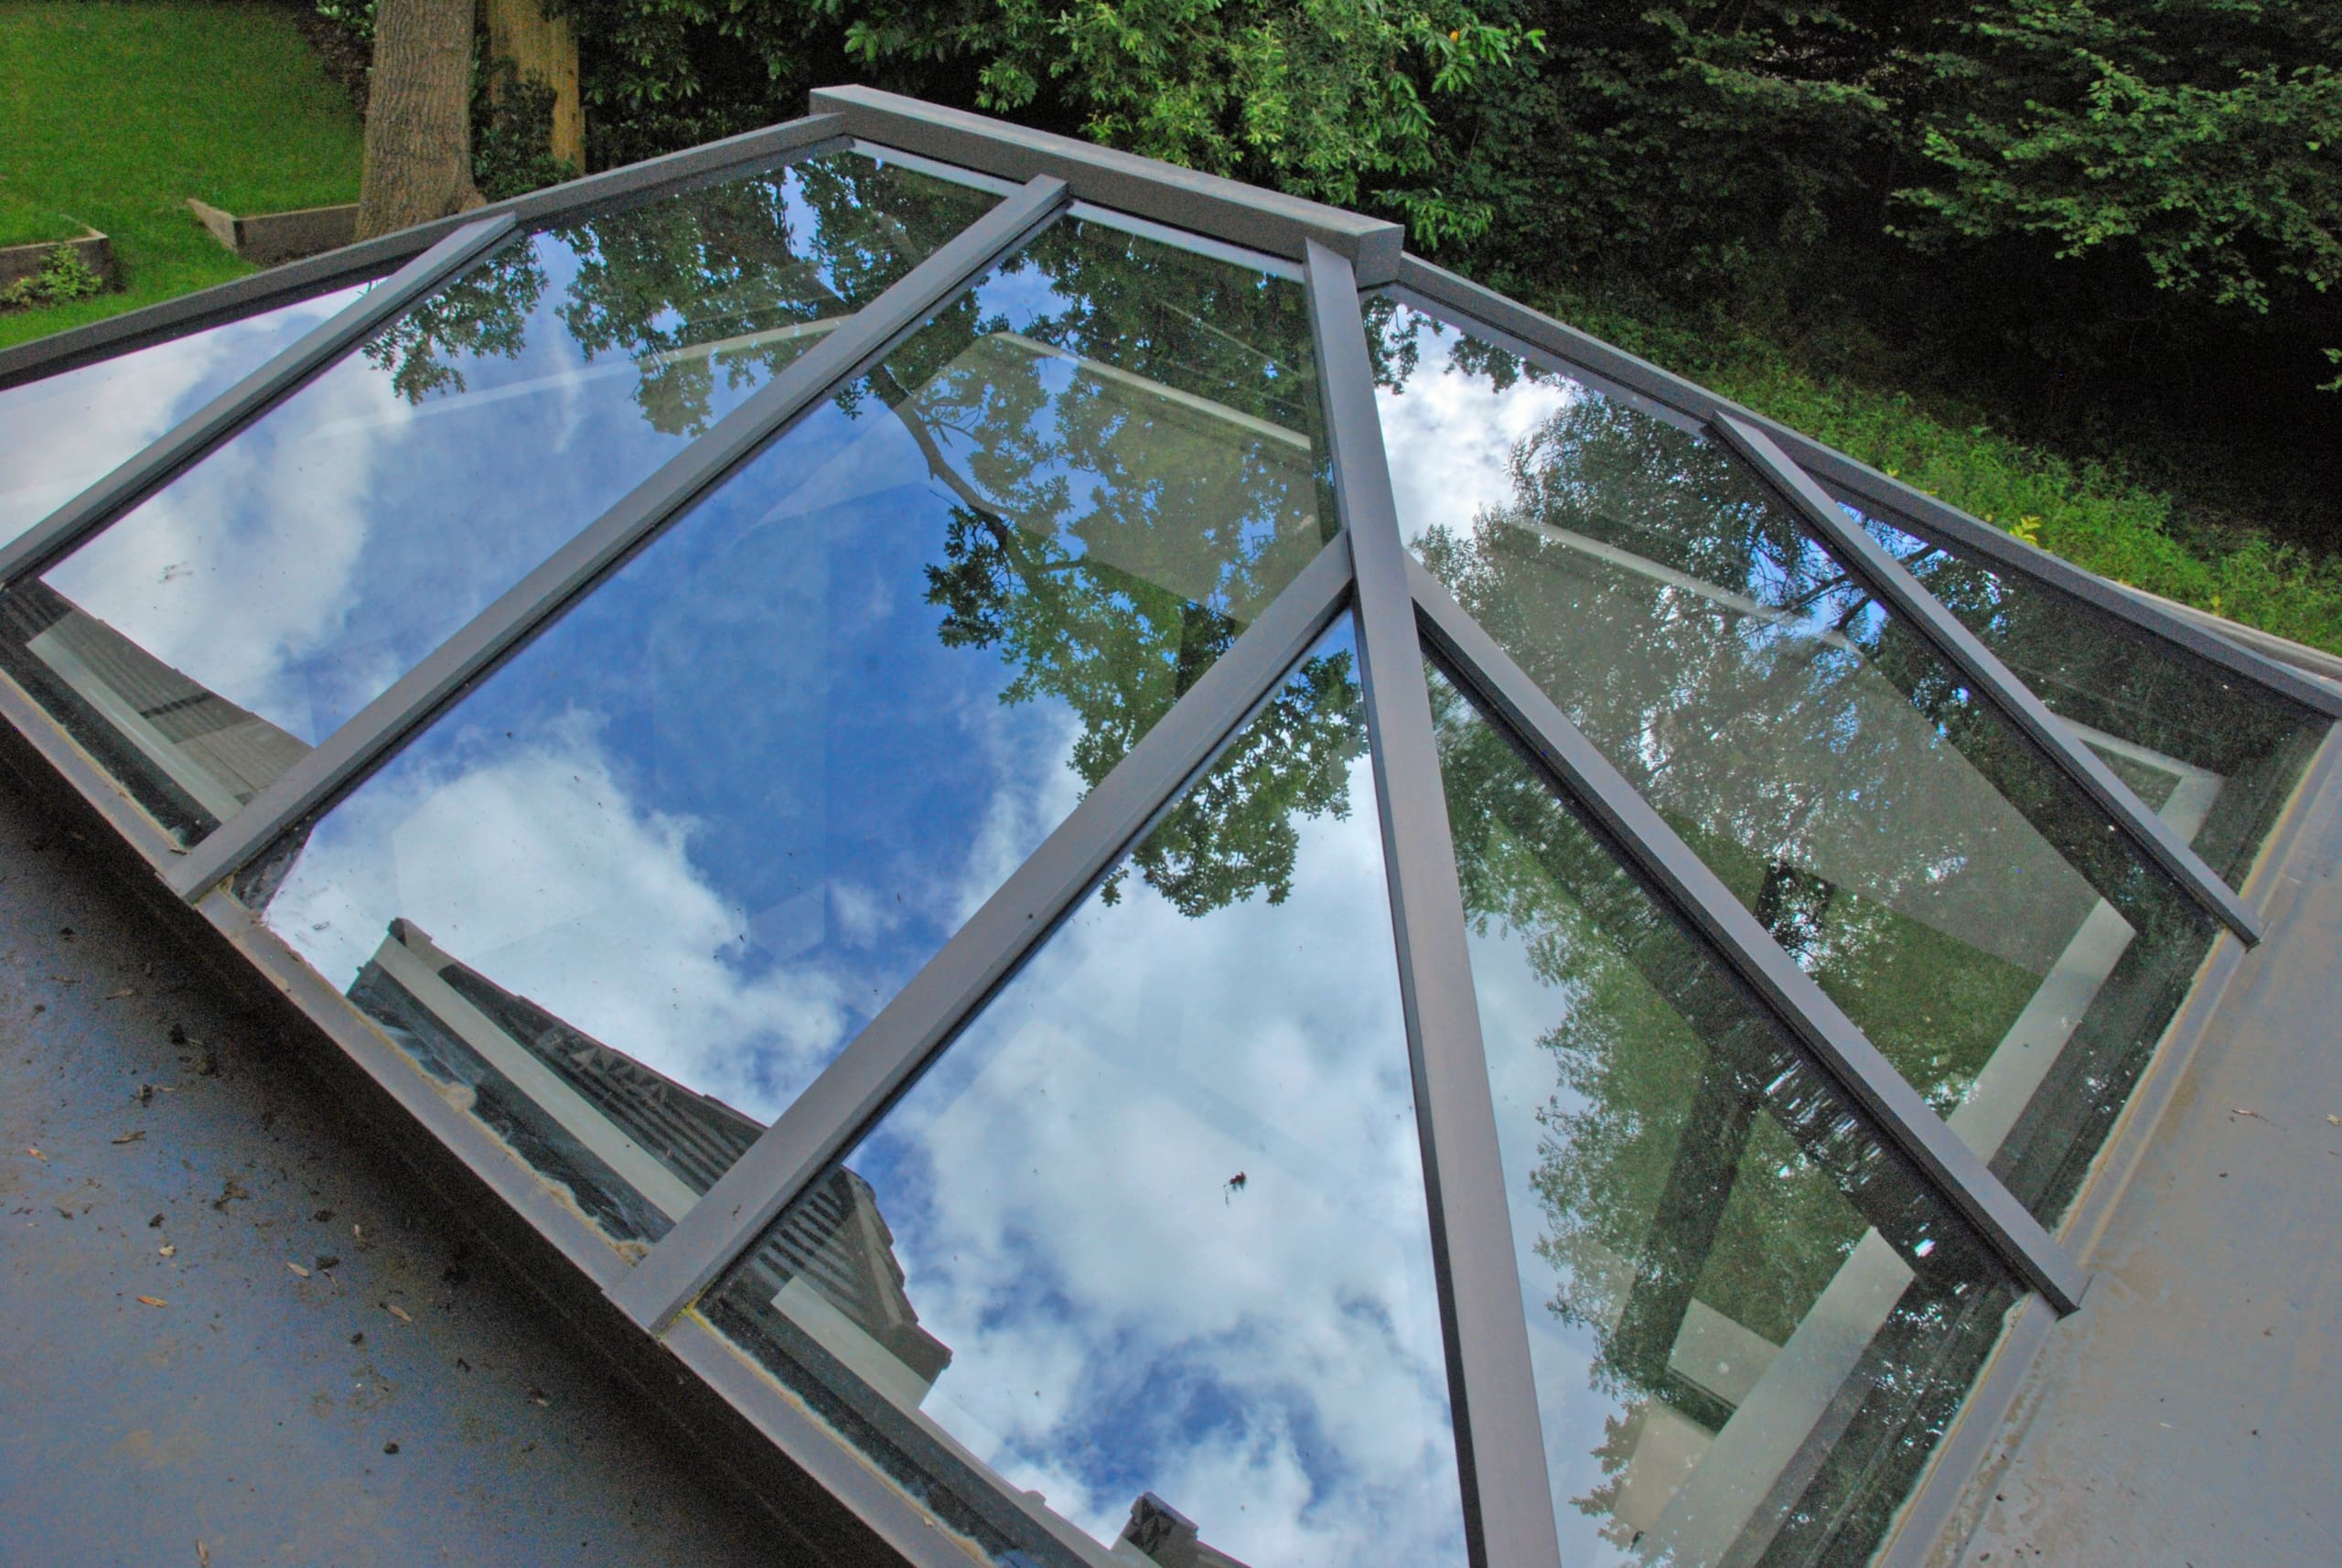 Roof lantern from above.